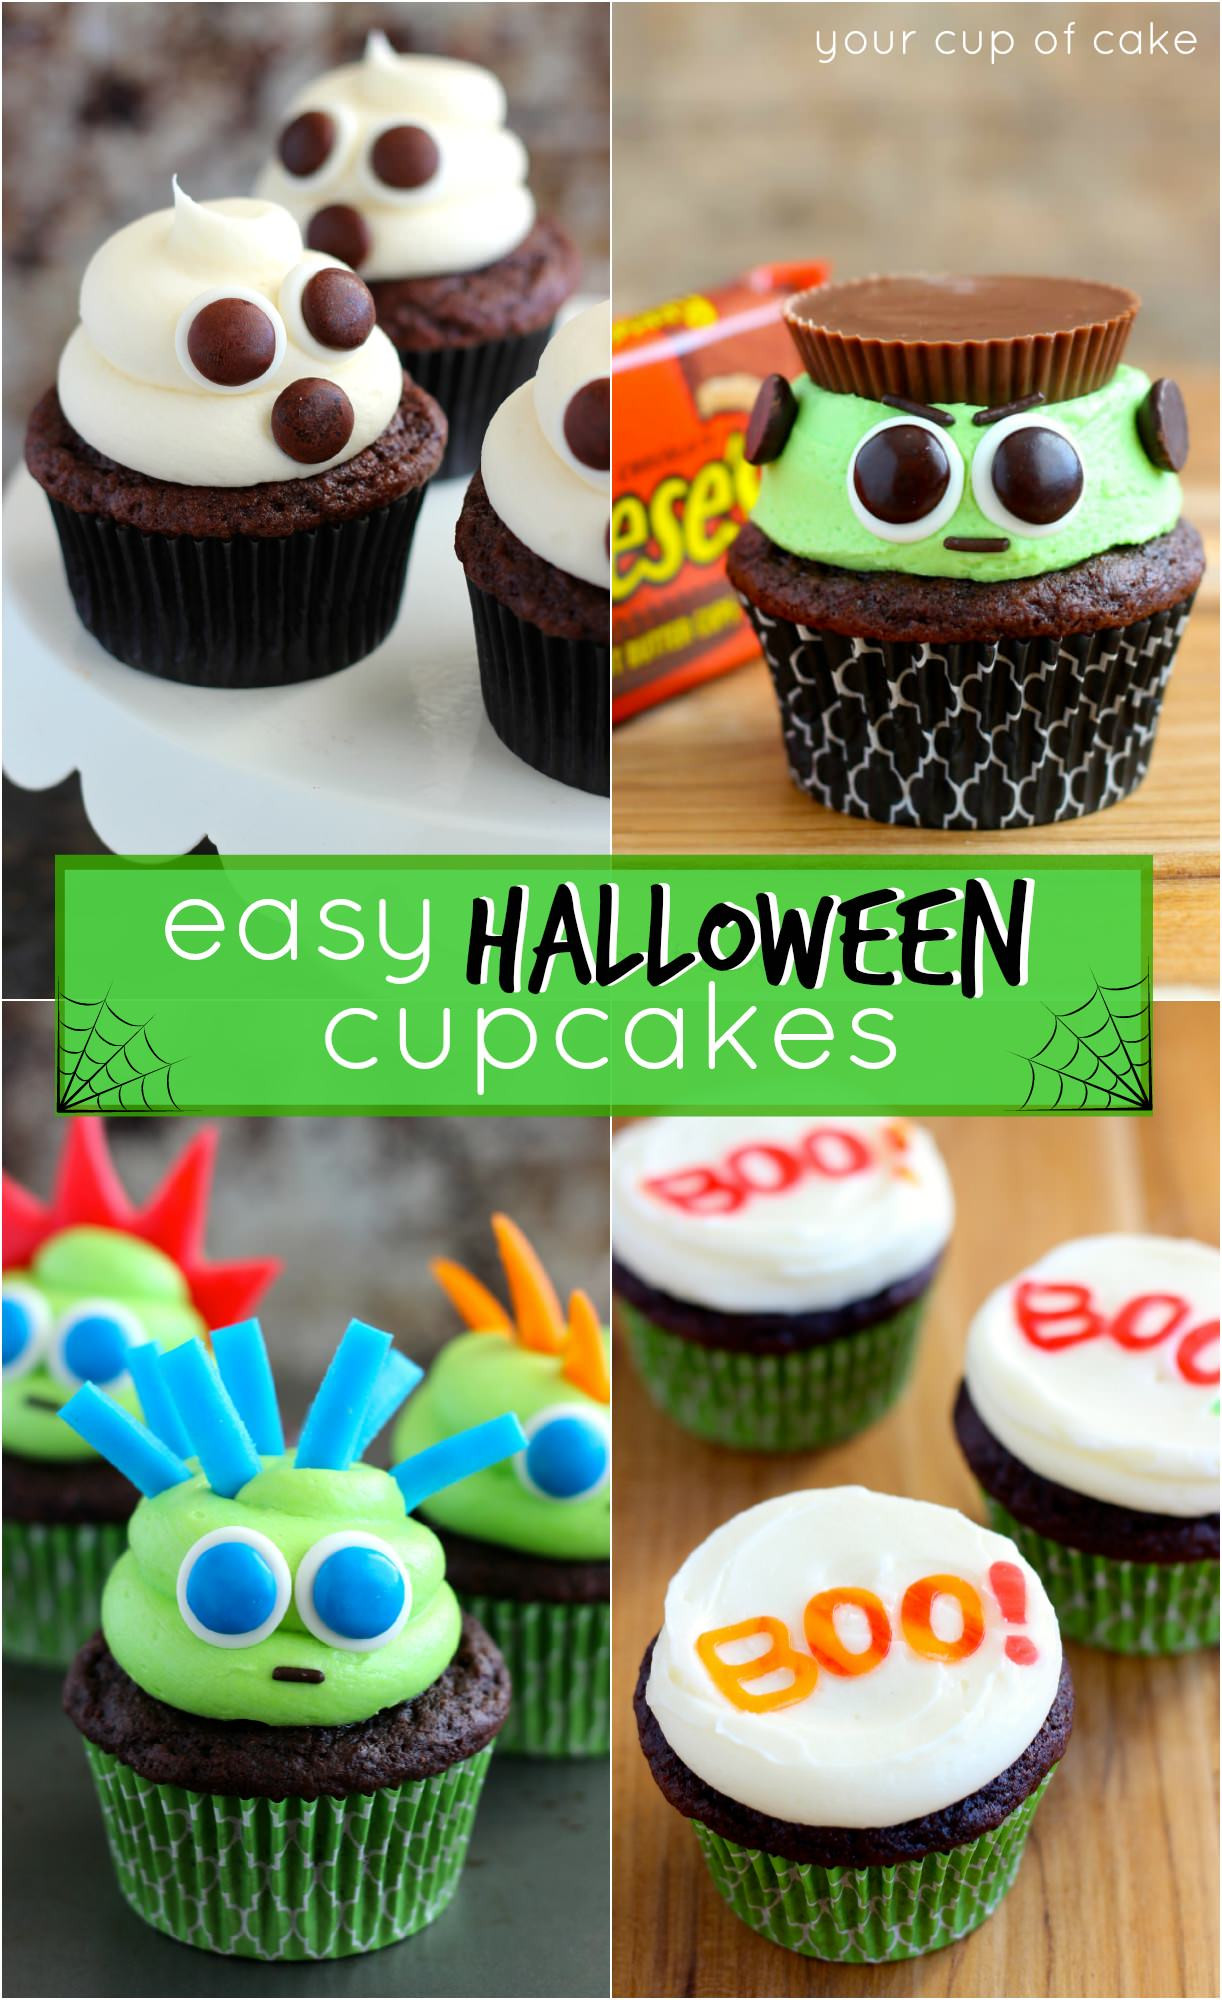 Cool Halloween Cup Cakes
 Cool Halloween Cupcakes – Festival Collections